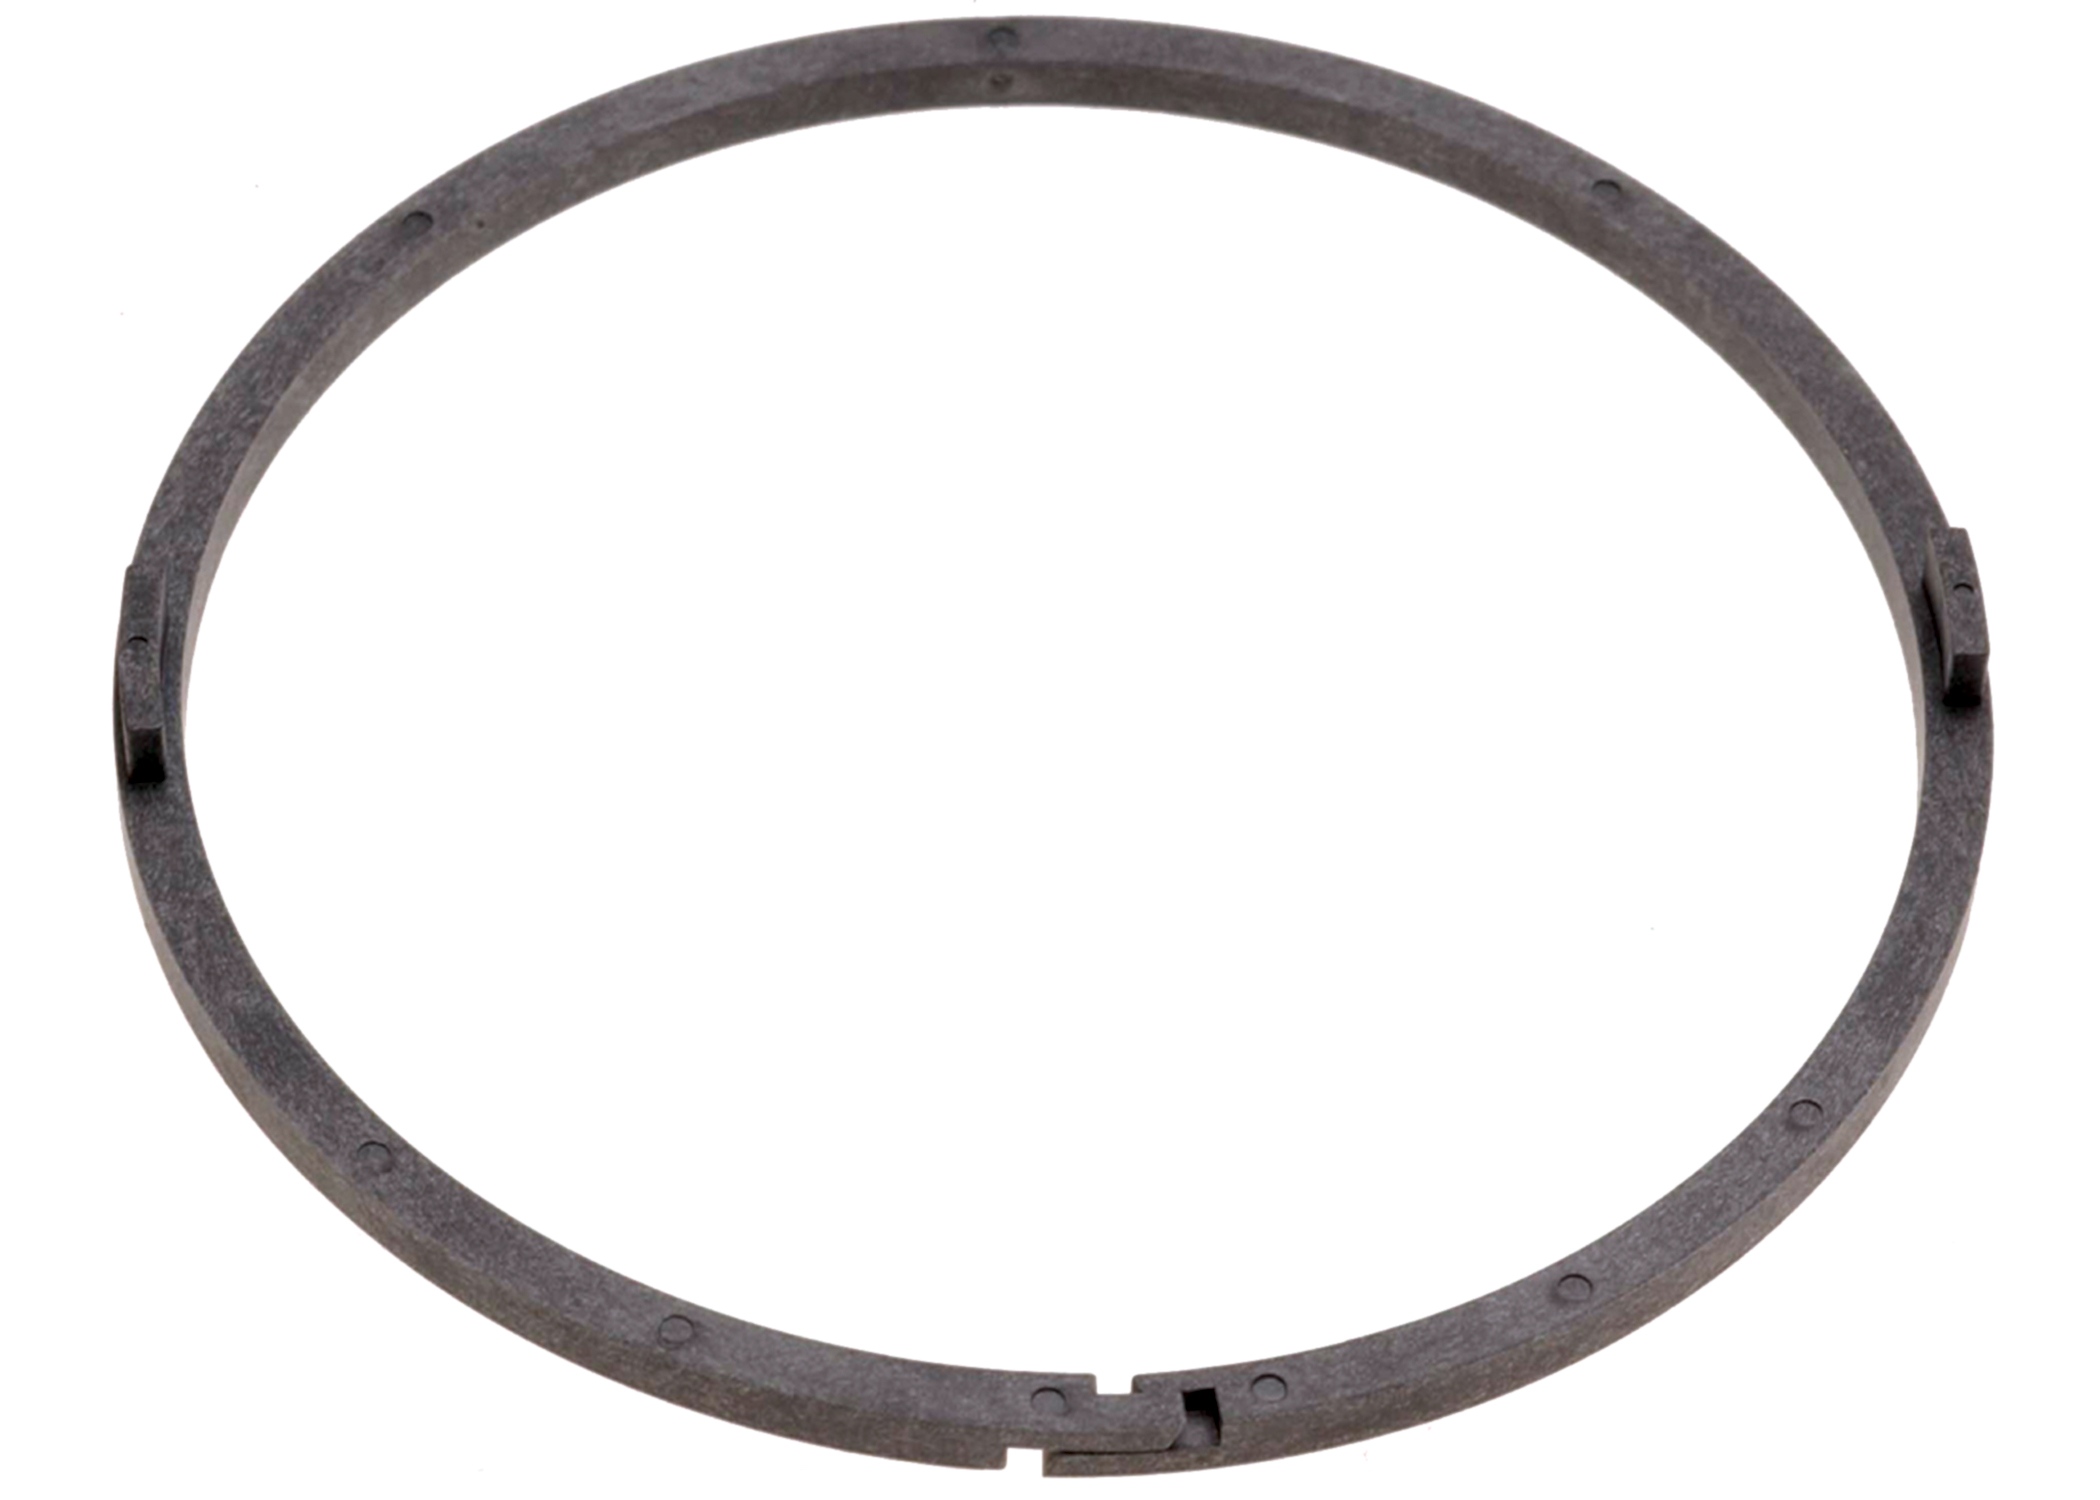 ACDELCO GM ORIGINAL EQUIPMENT - Automatic Transmission Clutch Housing Fluid Seal Ring (2nd) - DCB 24209498